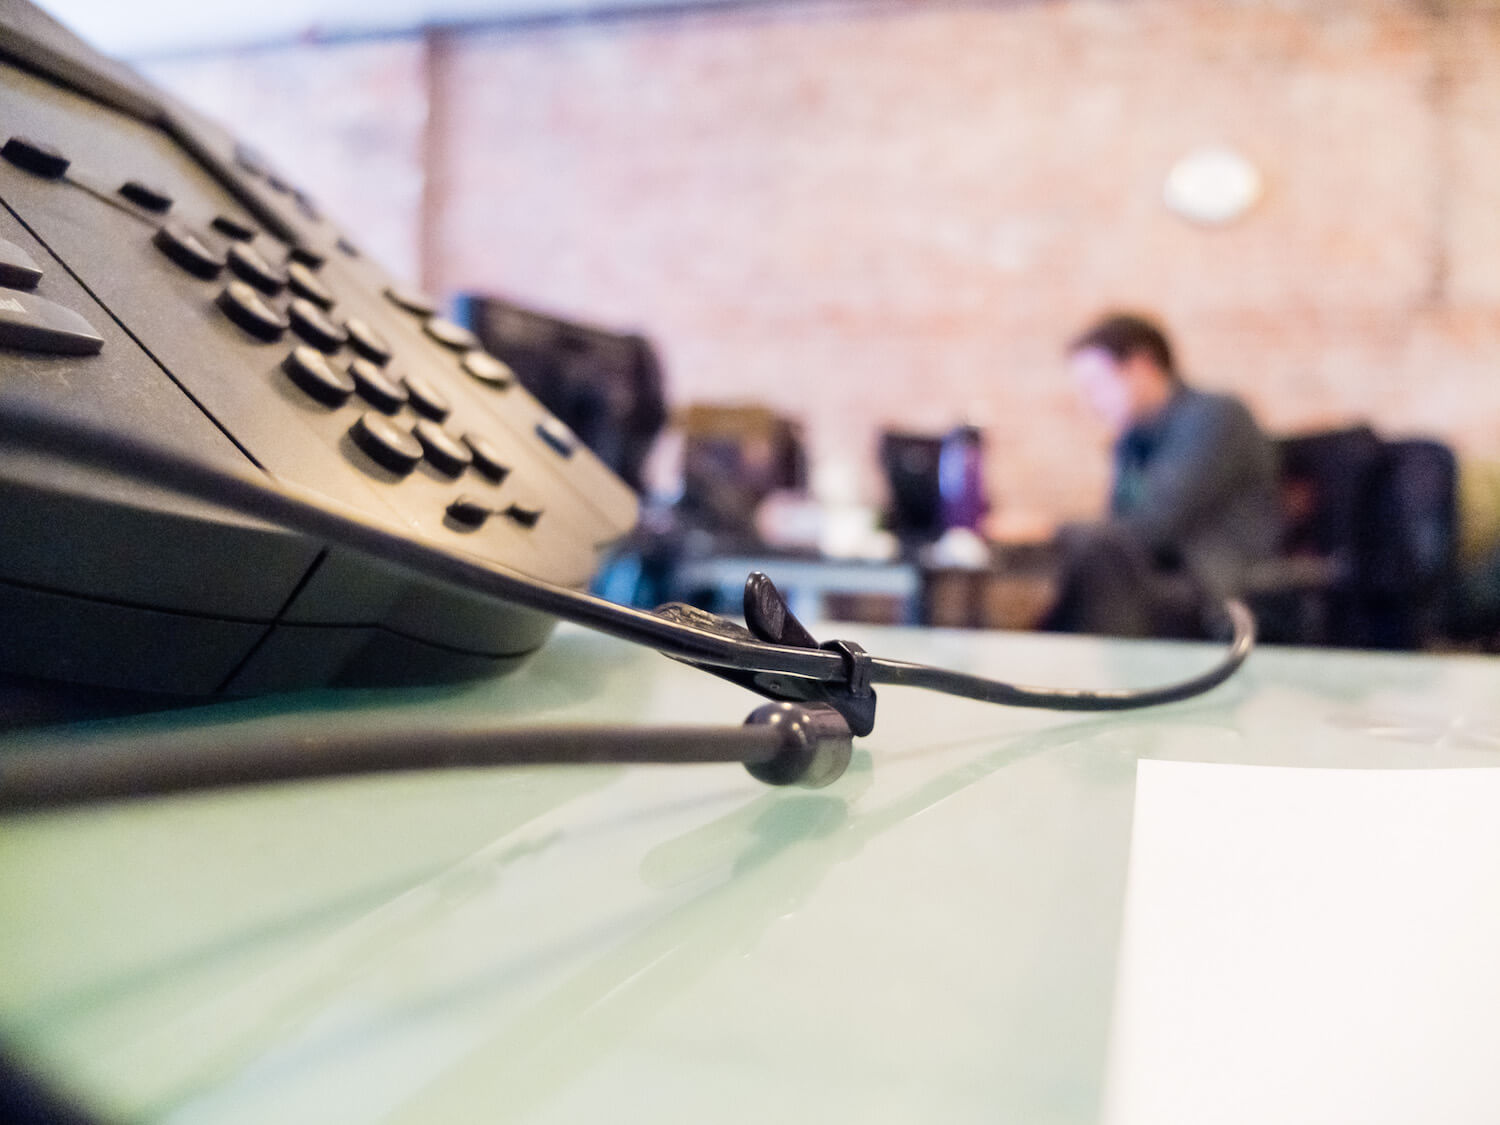 Business VoIP telephone system with cord leading to blurred image of man sitting at desk in background.